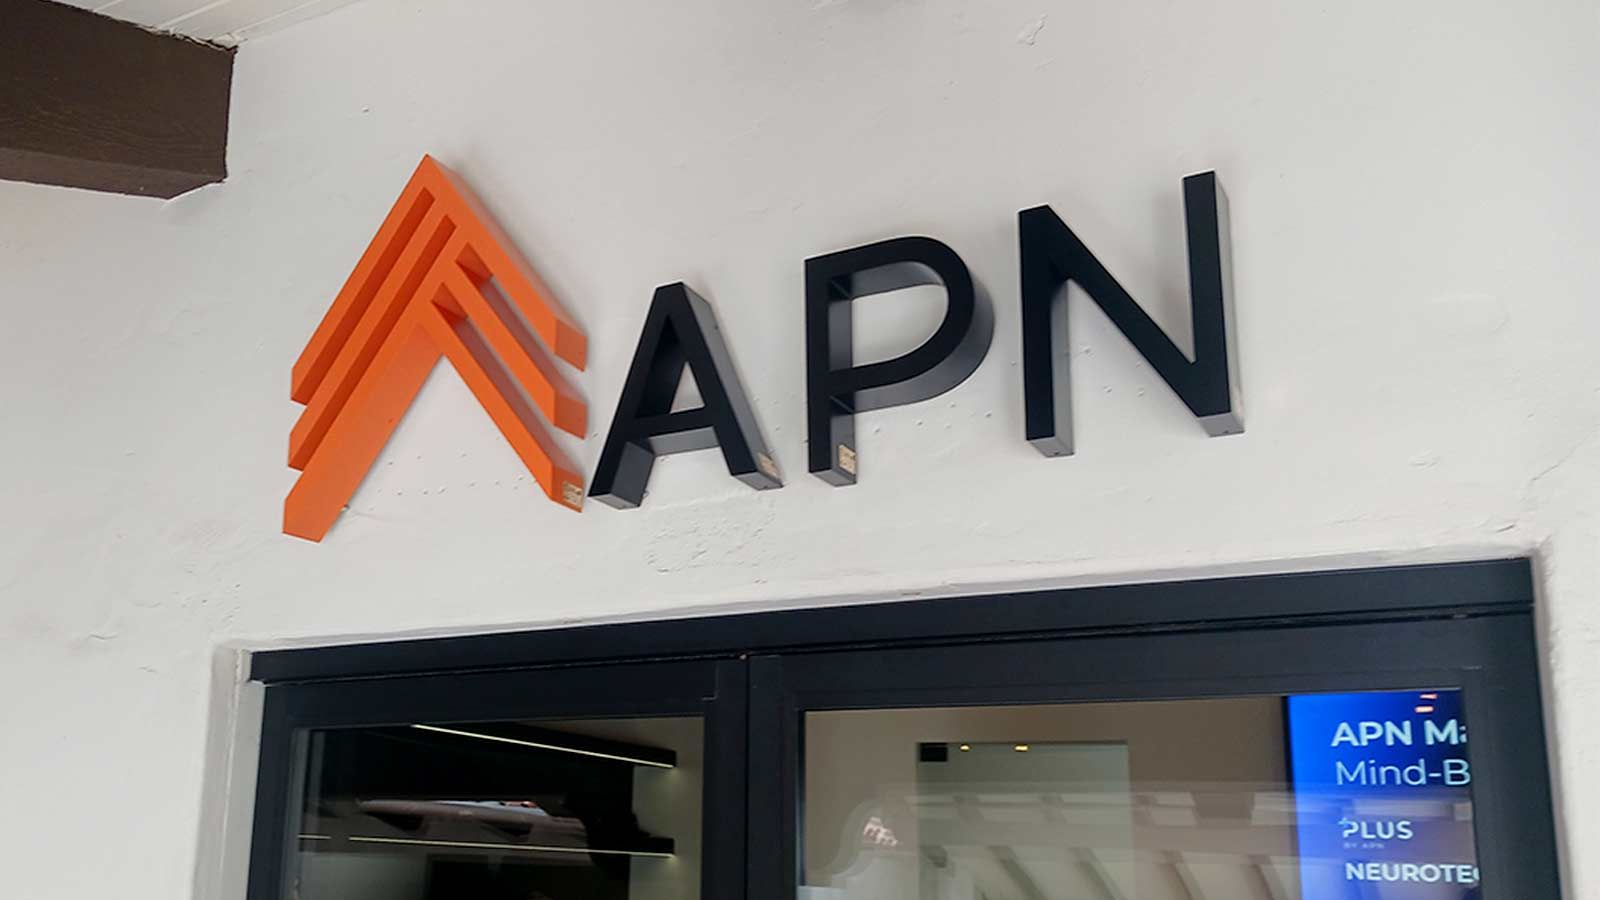 APN Capital light up sign mounted on the wall